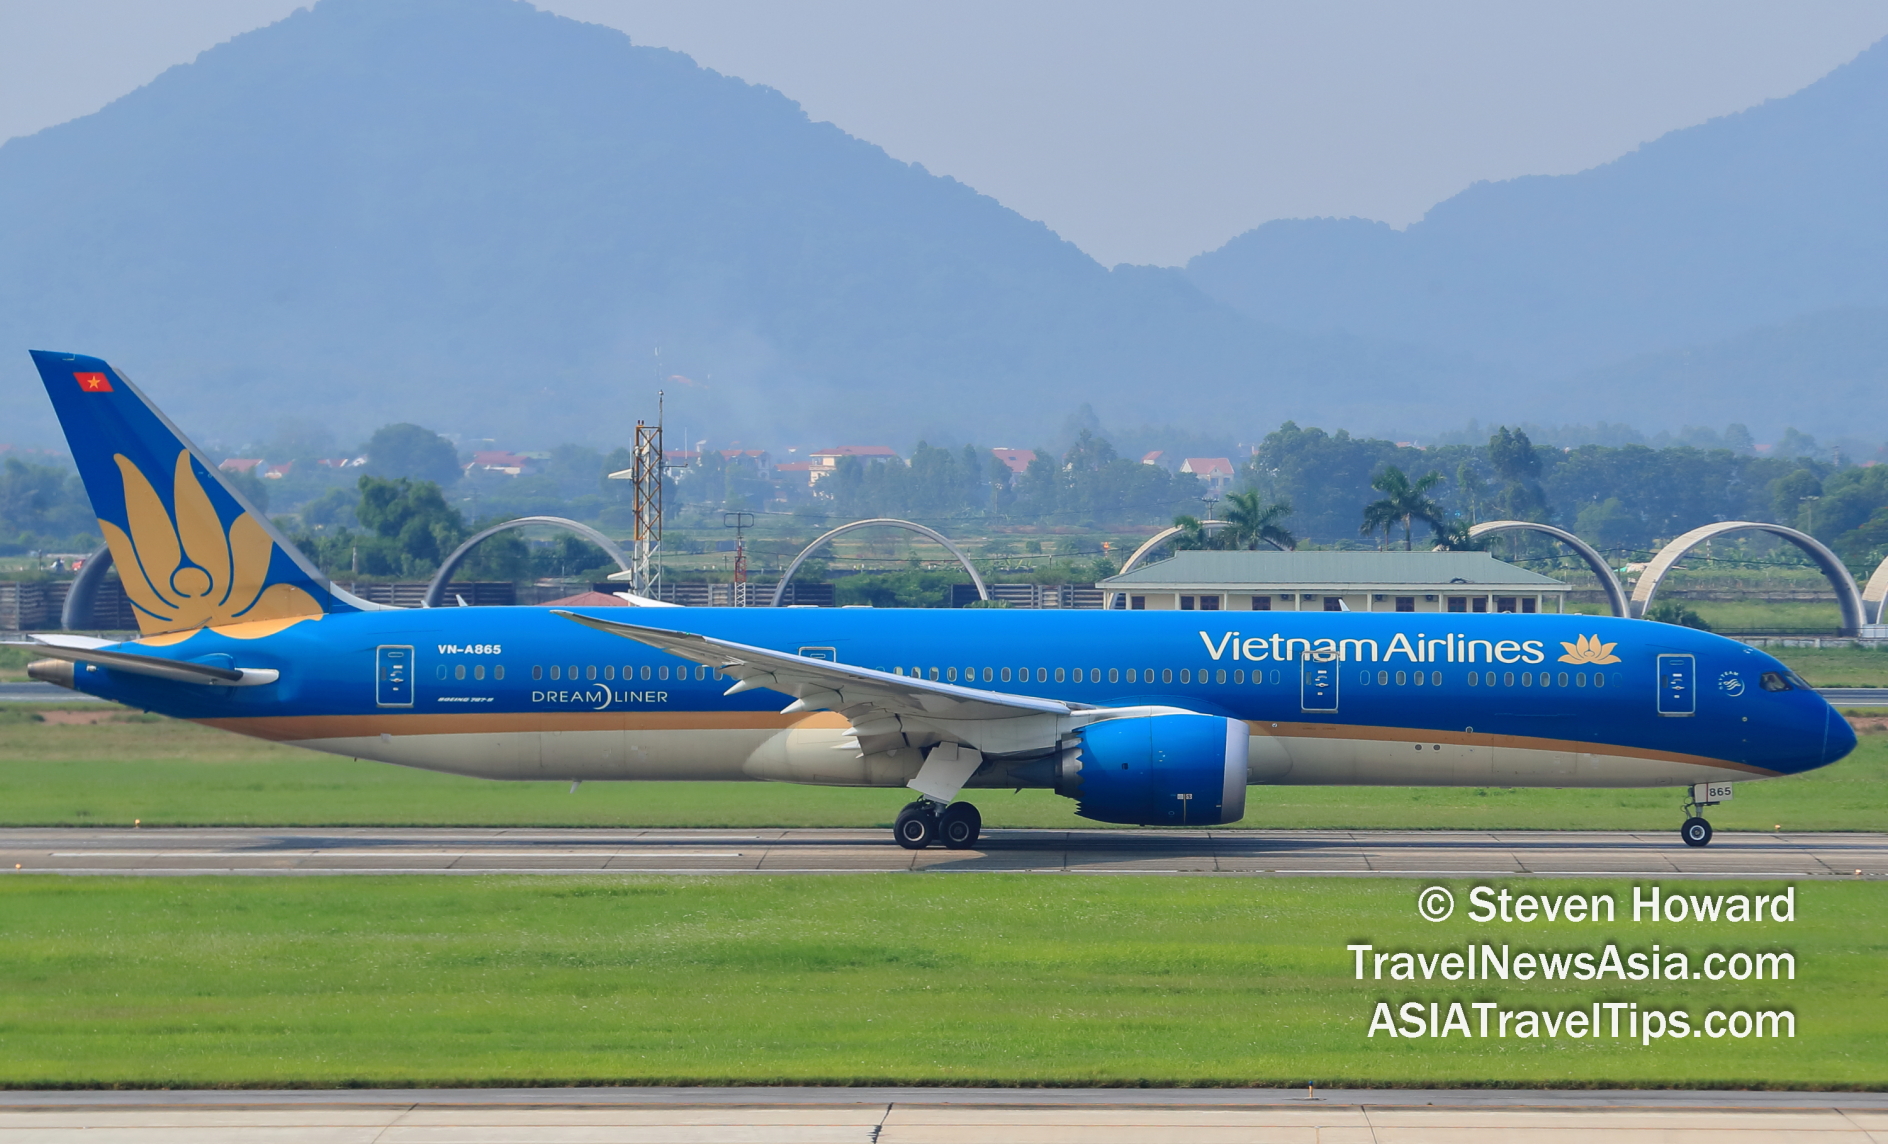 Vietnam Airlines Boeing 787-8 reg: VN-865. Picture by Steven Howard of TravelNewsAsia.com Click to enlarge.